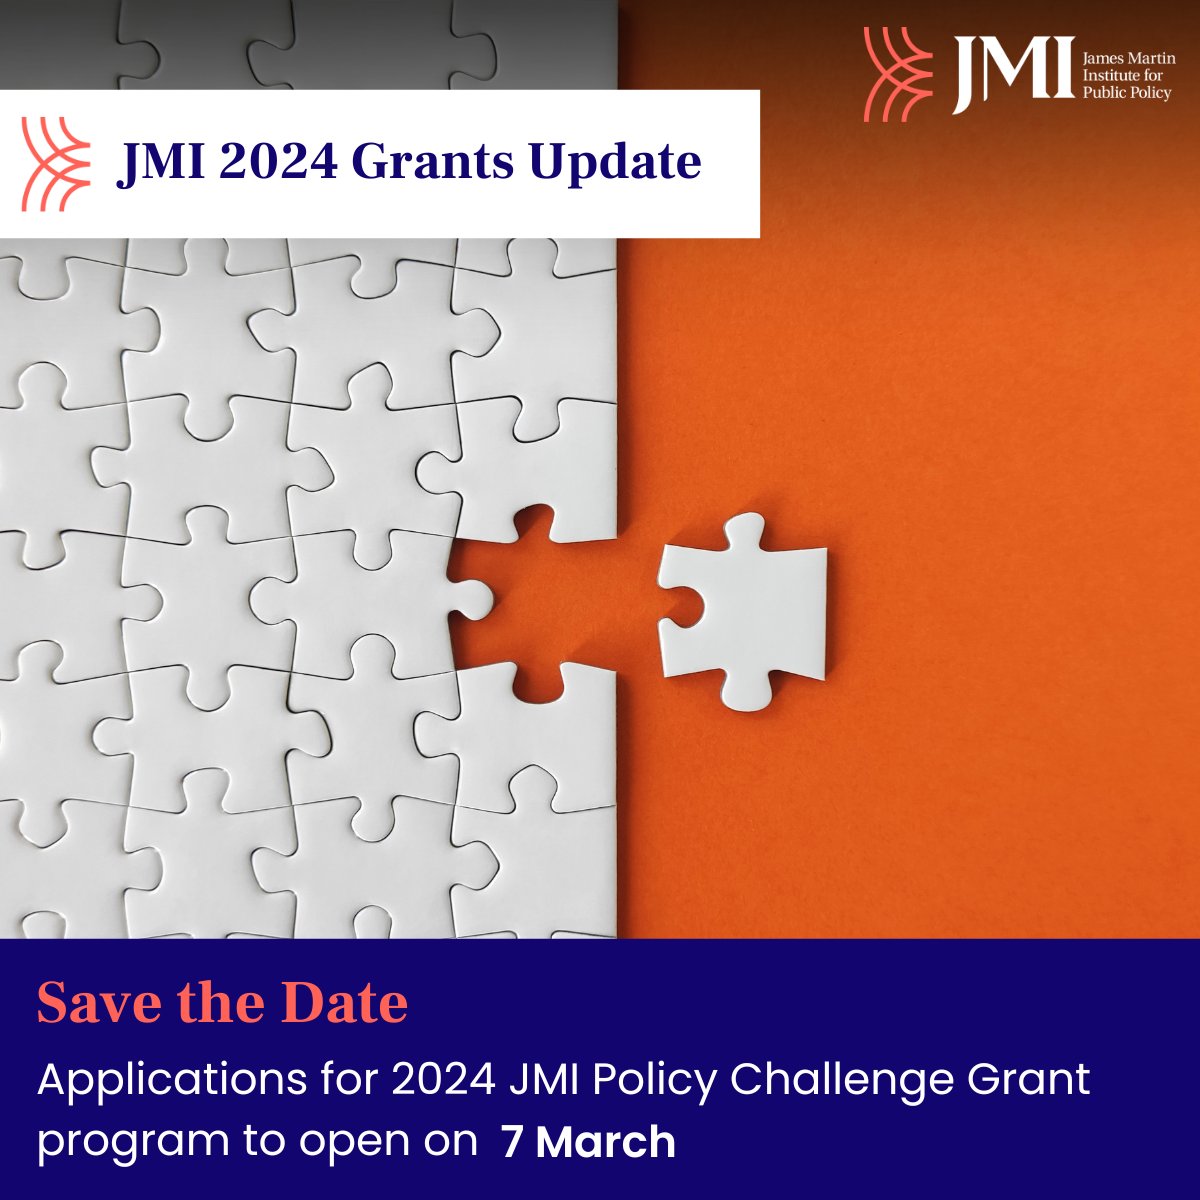 *Save the date* Applications for the 2024 JMI Policy Challenge Grant round will open on 7 March 2024. Entering its third year, JMI Policy Challenge Grants have already supported 13 cutting-edge projects with 58 experts. The JMI Policy Challenge Grant program is a prestigious…